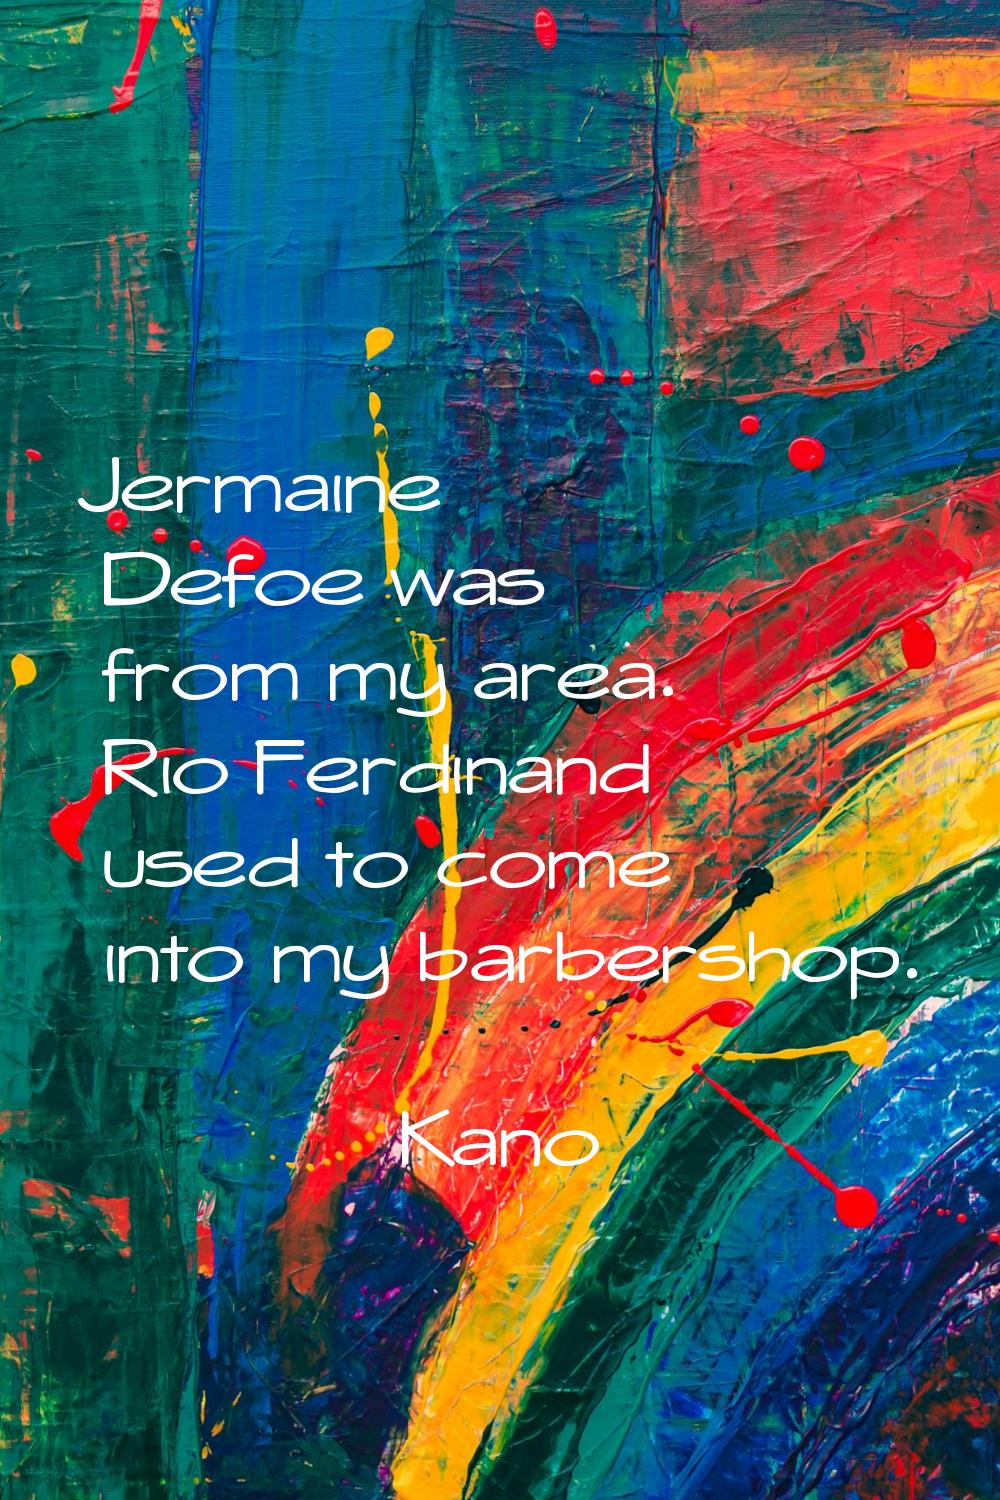 Jermaine Defoe was from my area. Rio Ferdinand used to come into my barbershop.